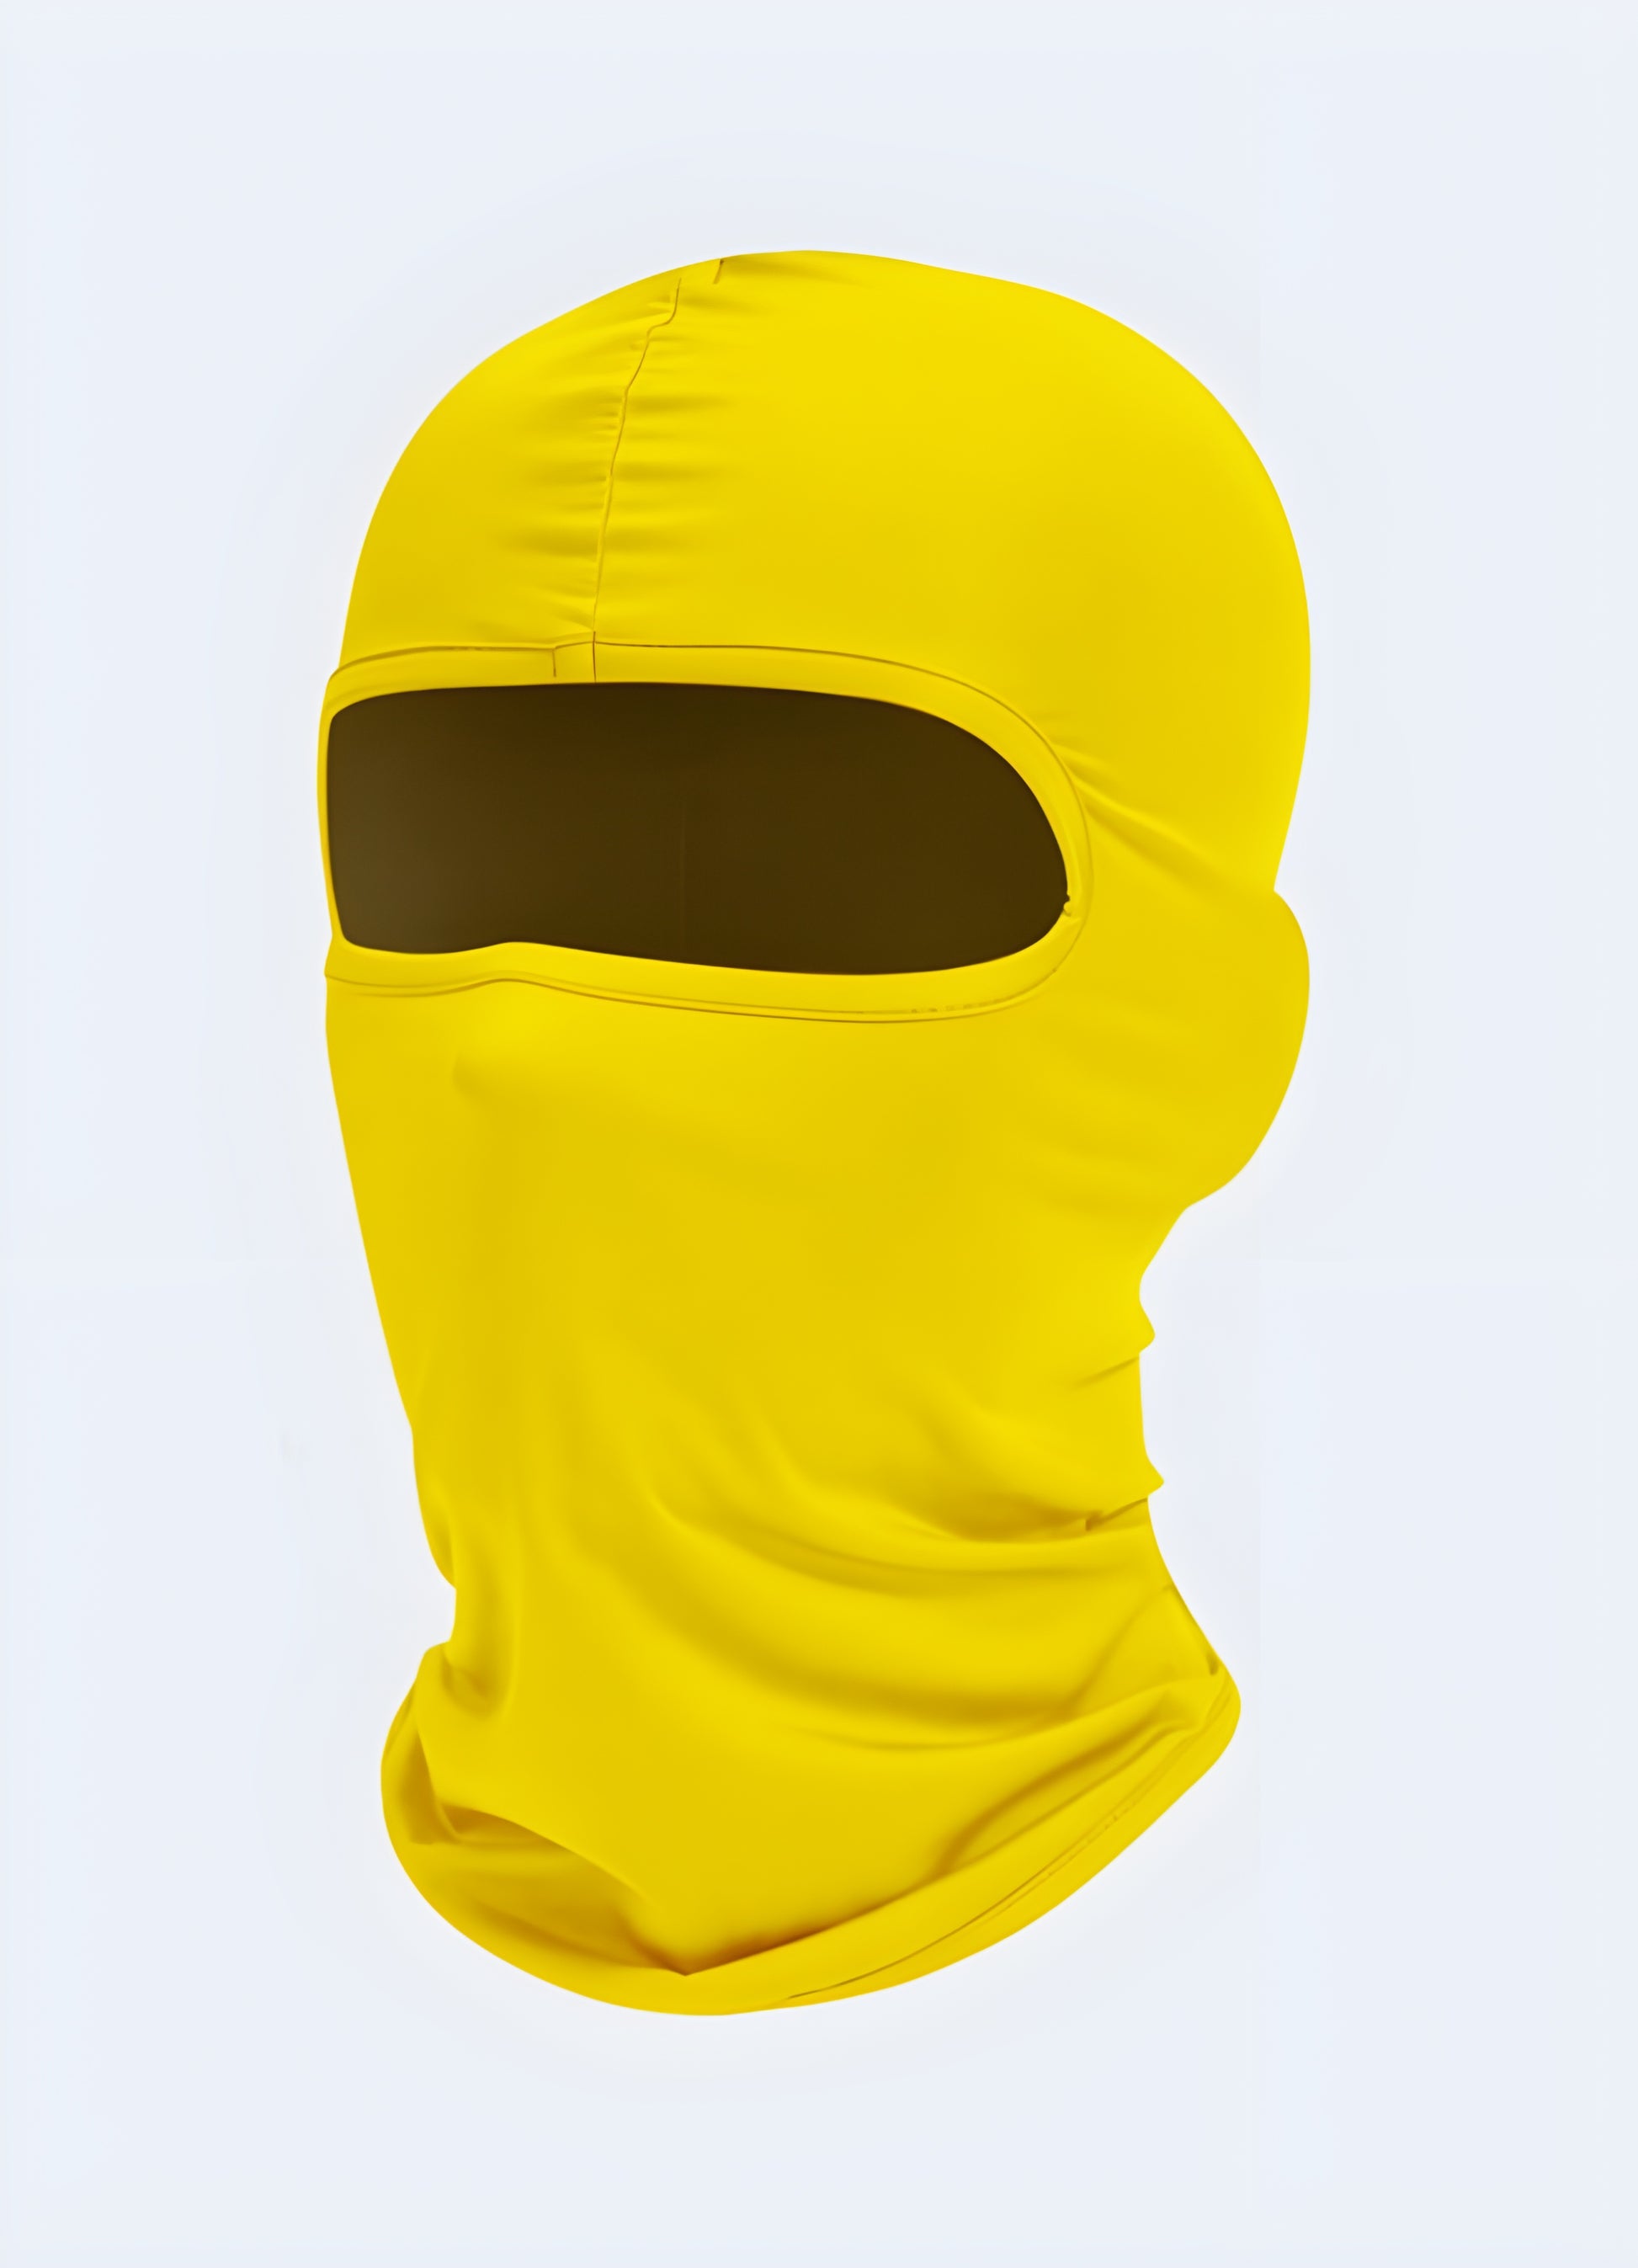 Whether you're scaling peaks or navigating urban jungles, this balaclava has you covered.